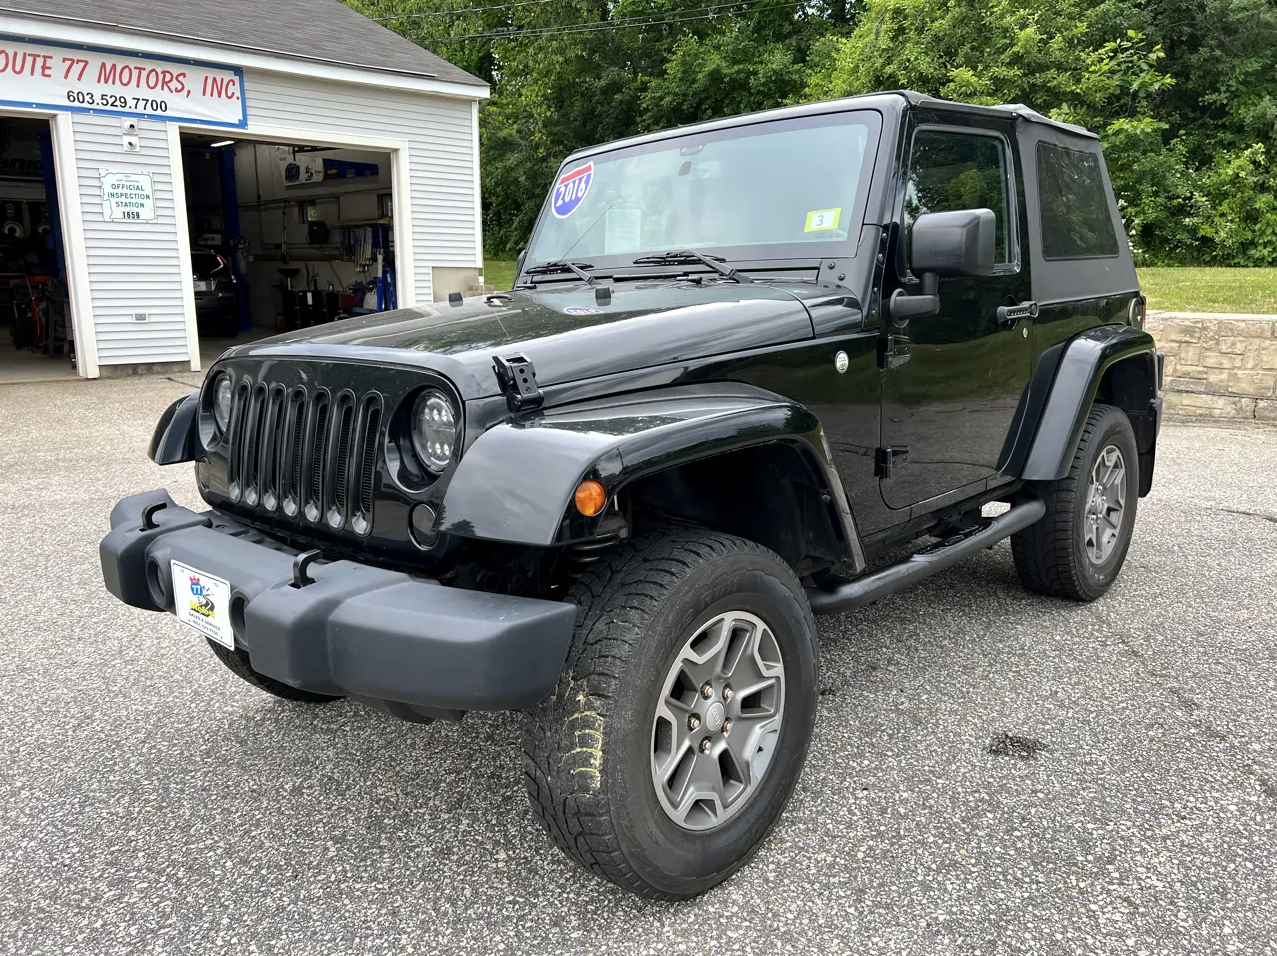 Jeep Lovers Rejoice: Find Your Preowned Gem in Our Inventory!